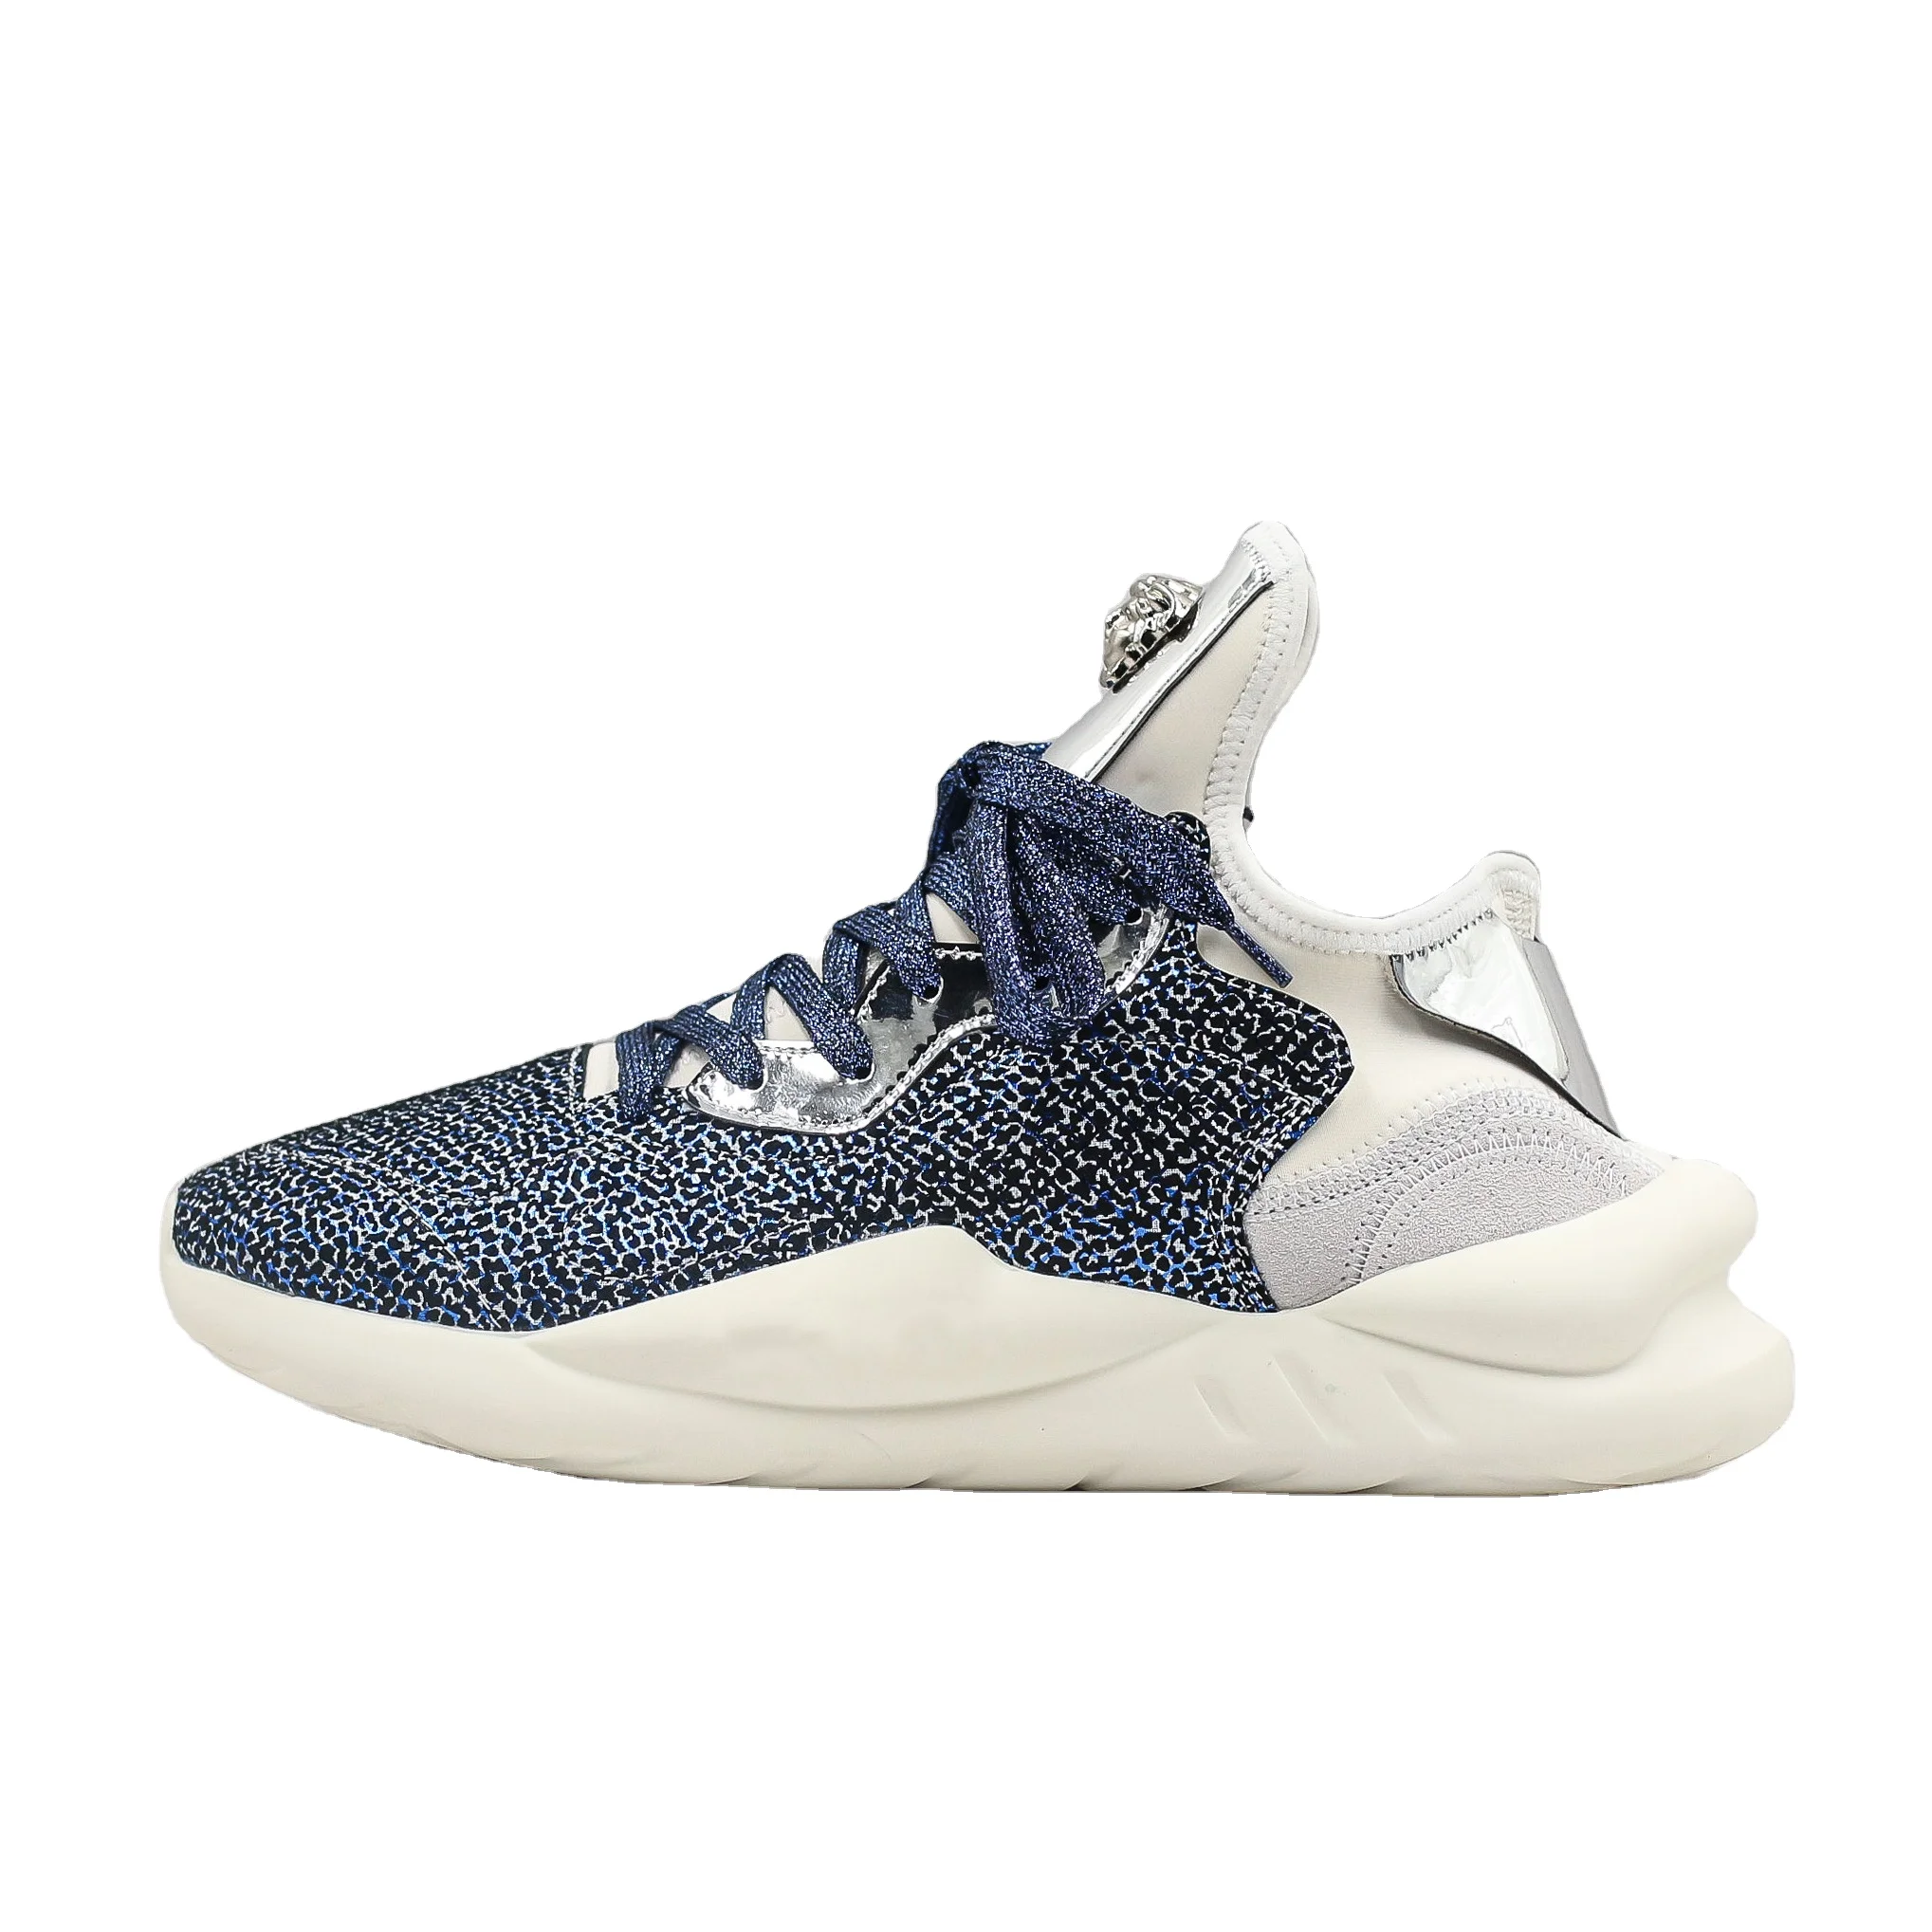 

Y-3# Kaiwa chunky sneakers super light breathable upper men's and women's casual shoes, Blue